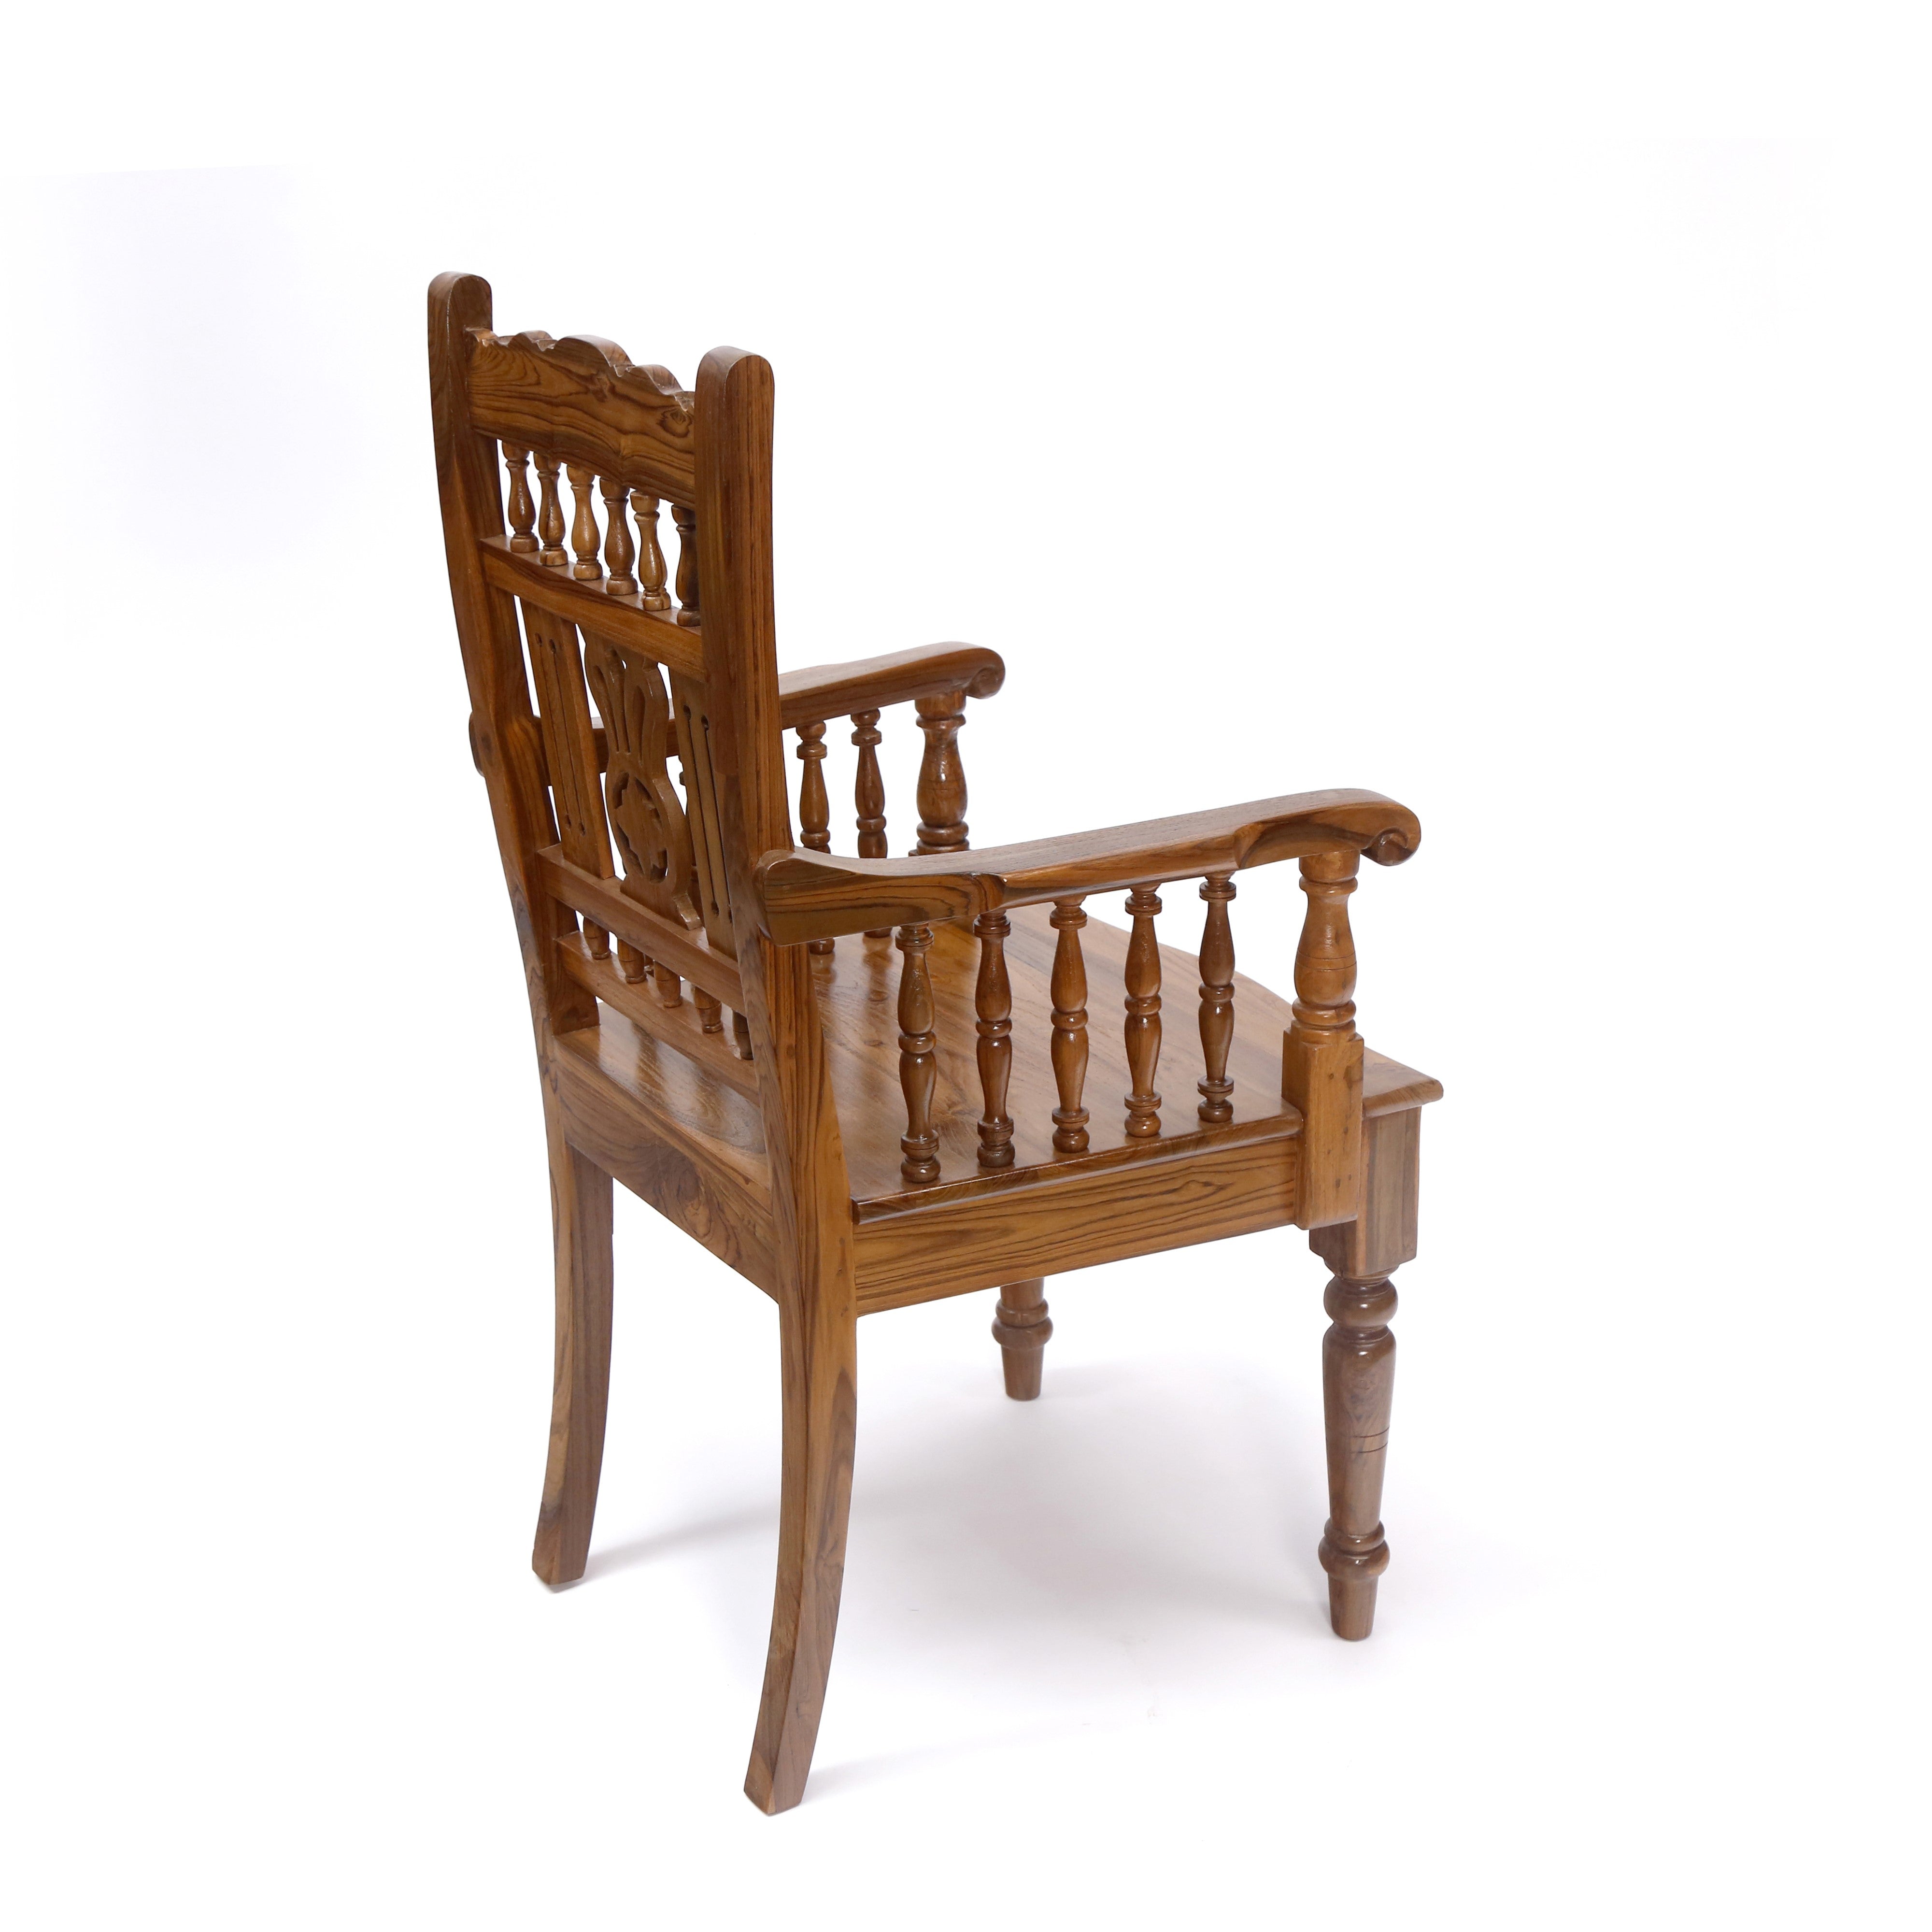 Natural Tone Intricate Royal Carved Chair South Indian Arm Chair